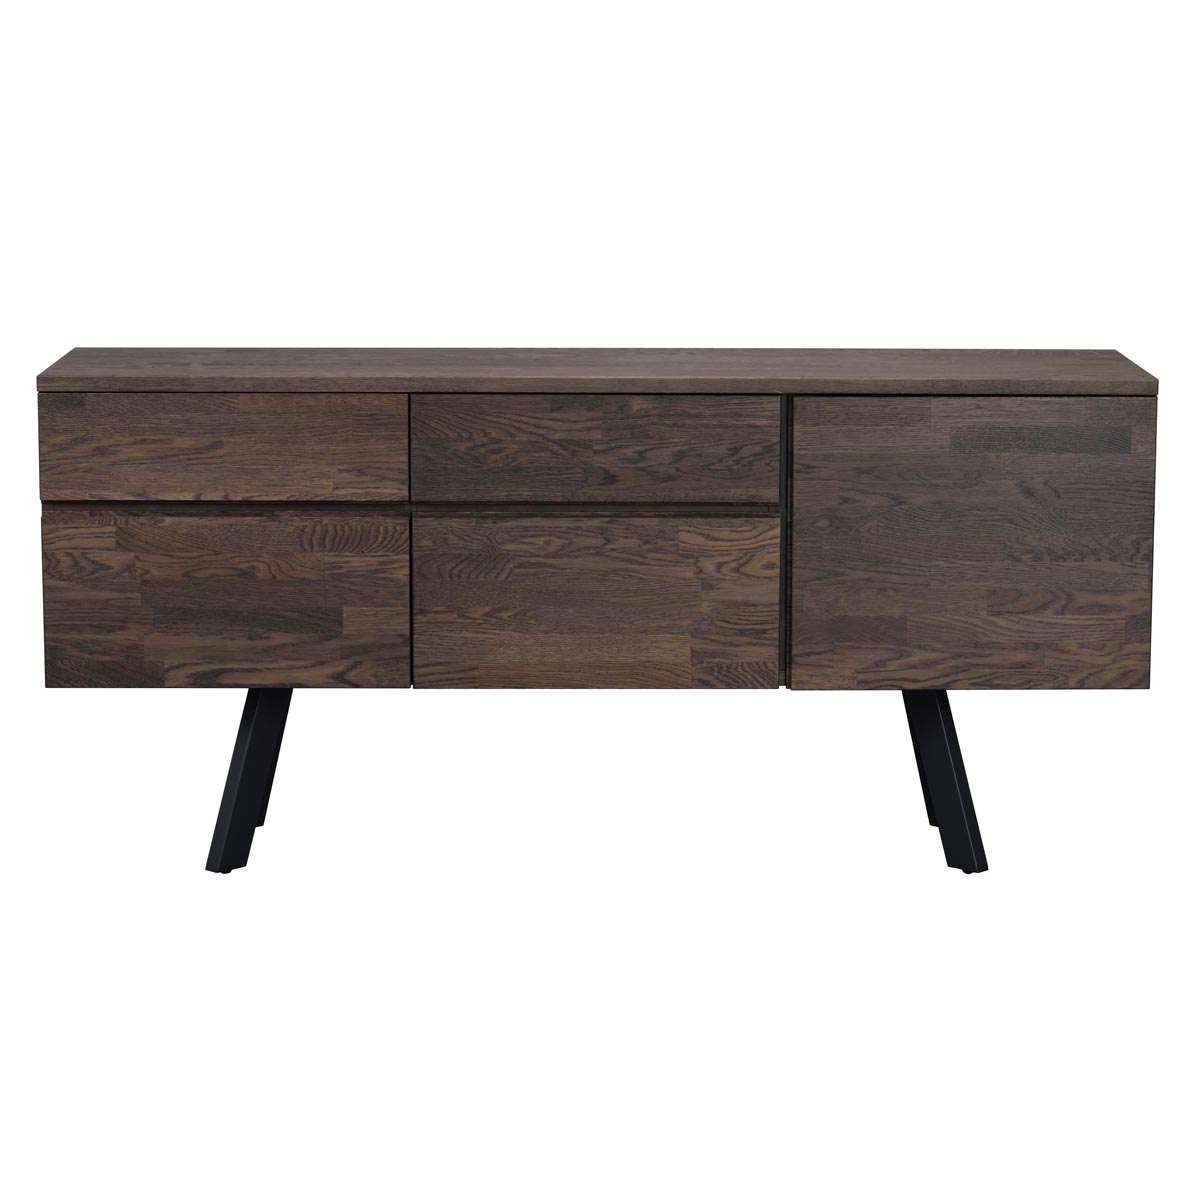 Fred sideboard